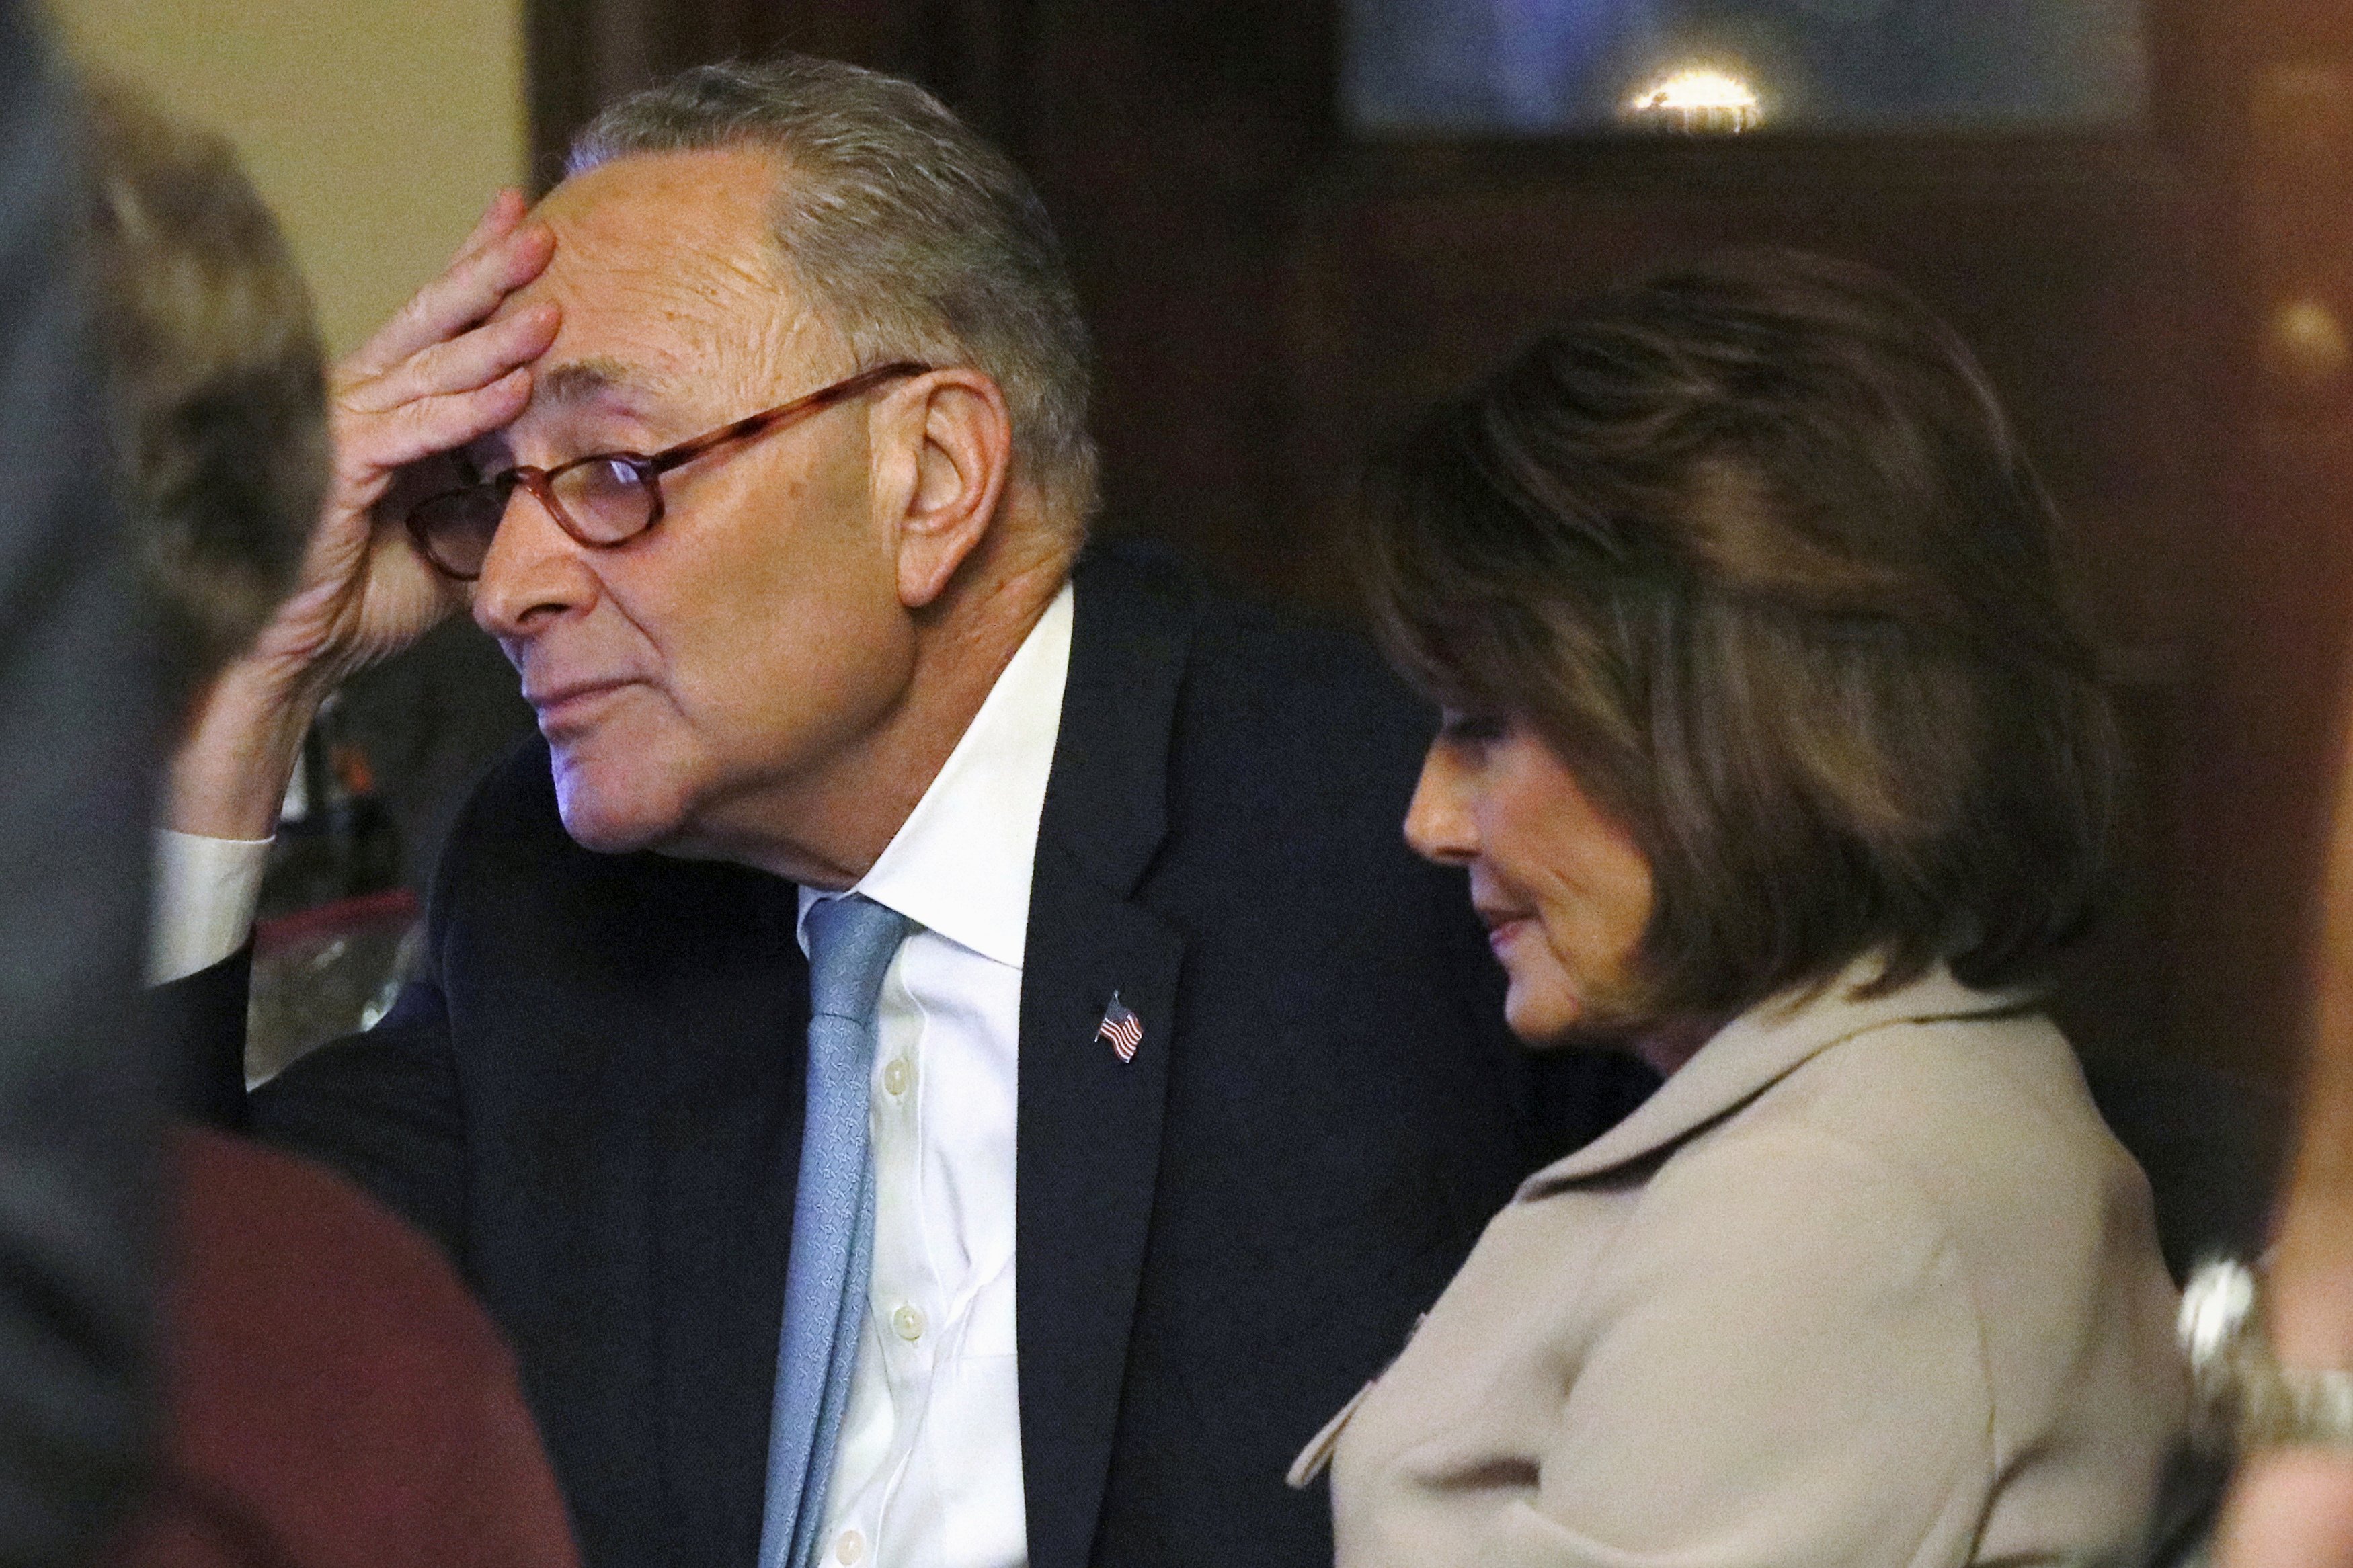 U.S. Senate Minority Leader Chuck Schumer and Speaker of the House Nancy Pelosi are seen shortly after concluding their joint response, to President Trump's prime time address, on Capitol Hill in Washington, U.S., January 8, 2019. REUTERS/Jonathan Ernst TPX IMAGES OF THE DAY - RC1CC2C80350